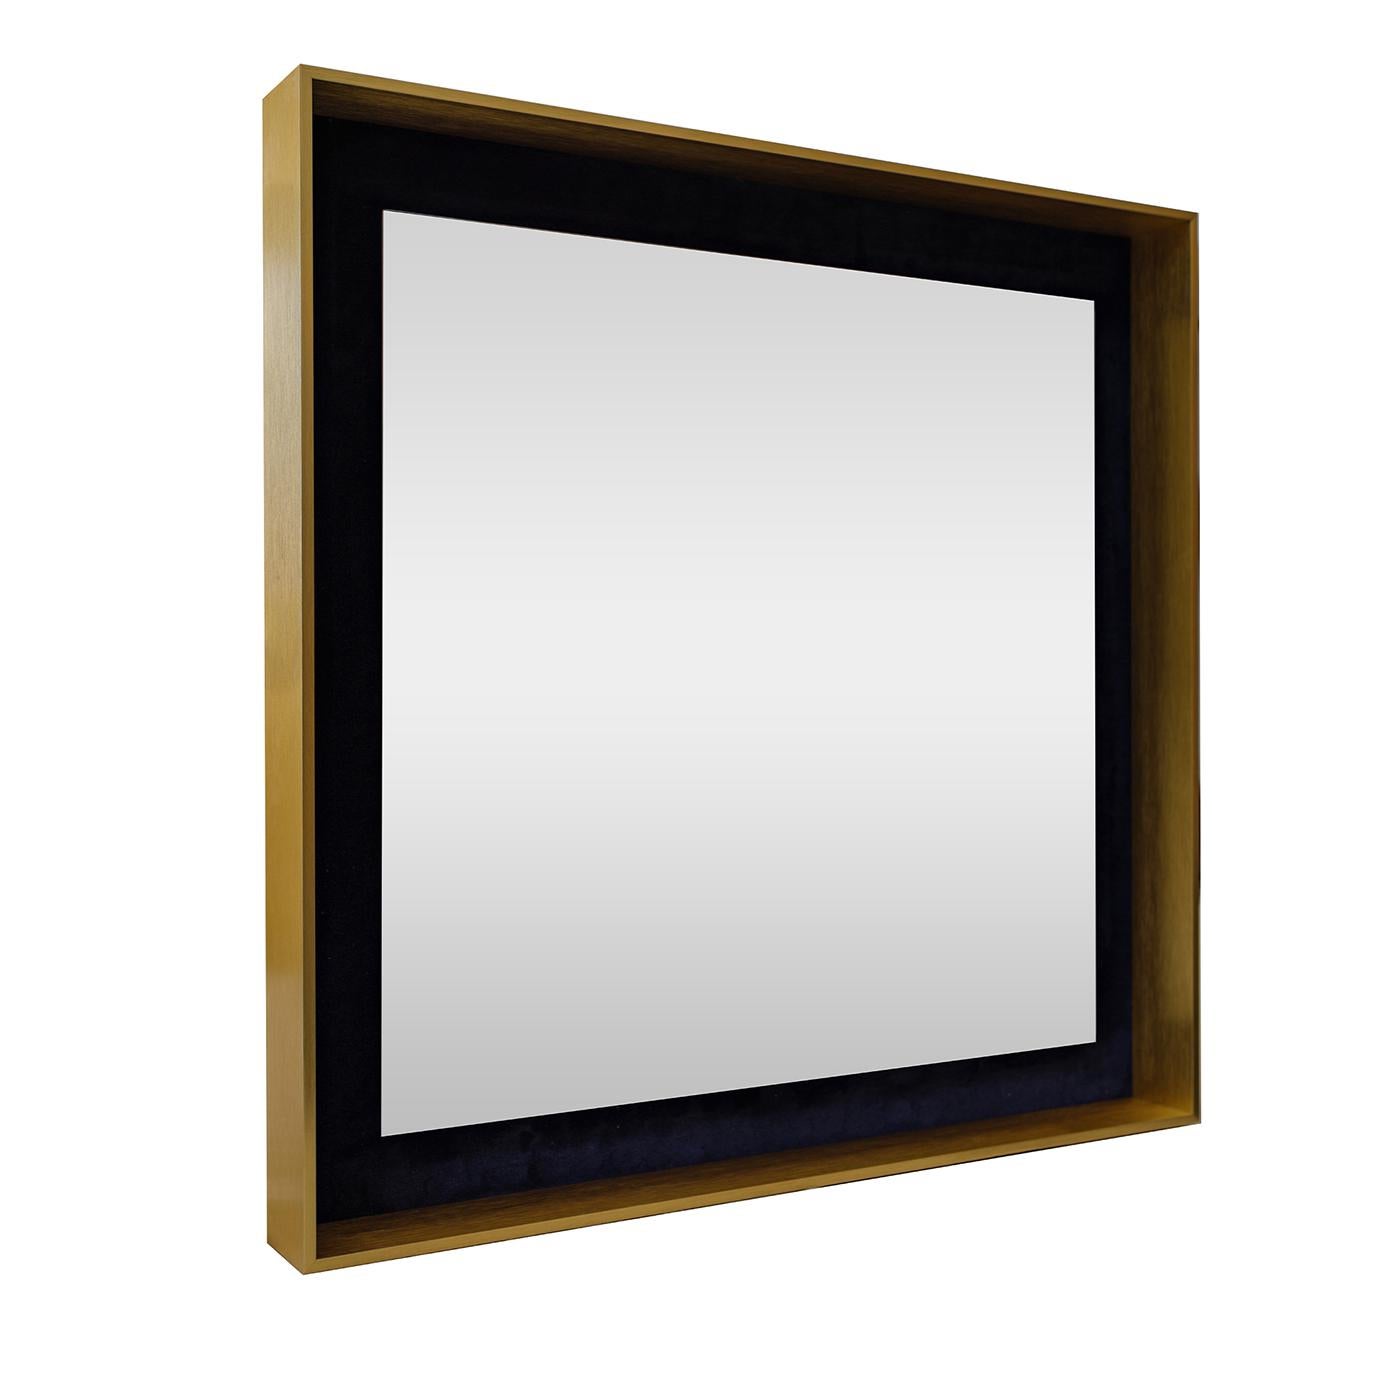 1 Beekman features a floating mirror on a soft velvet base encased in a painted aluminum frame. The concept contemplates specifying unlimited materials for the base, from colored mirrors to wood, to leather, as well as different finishes for the